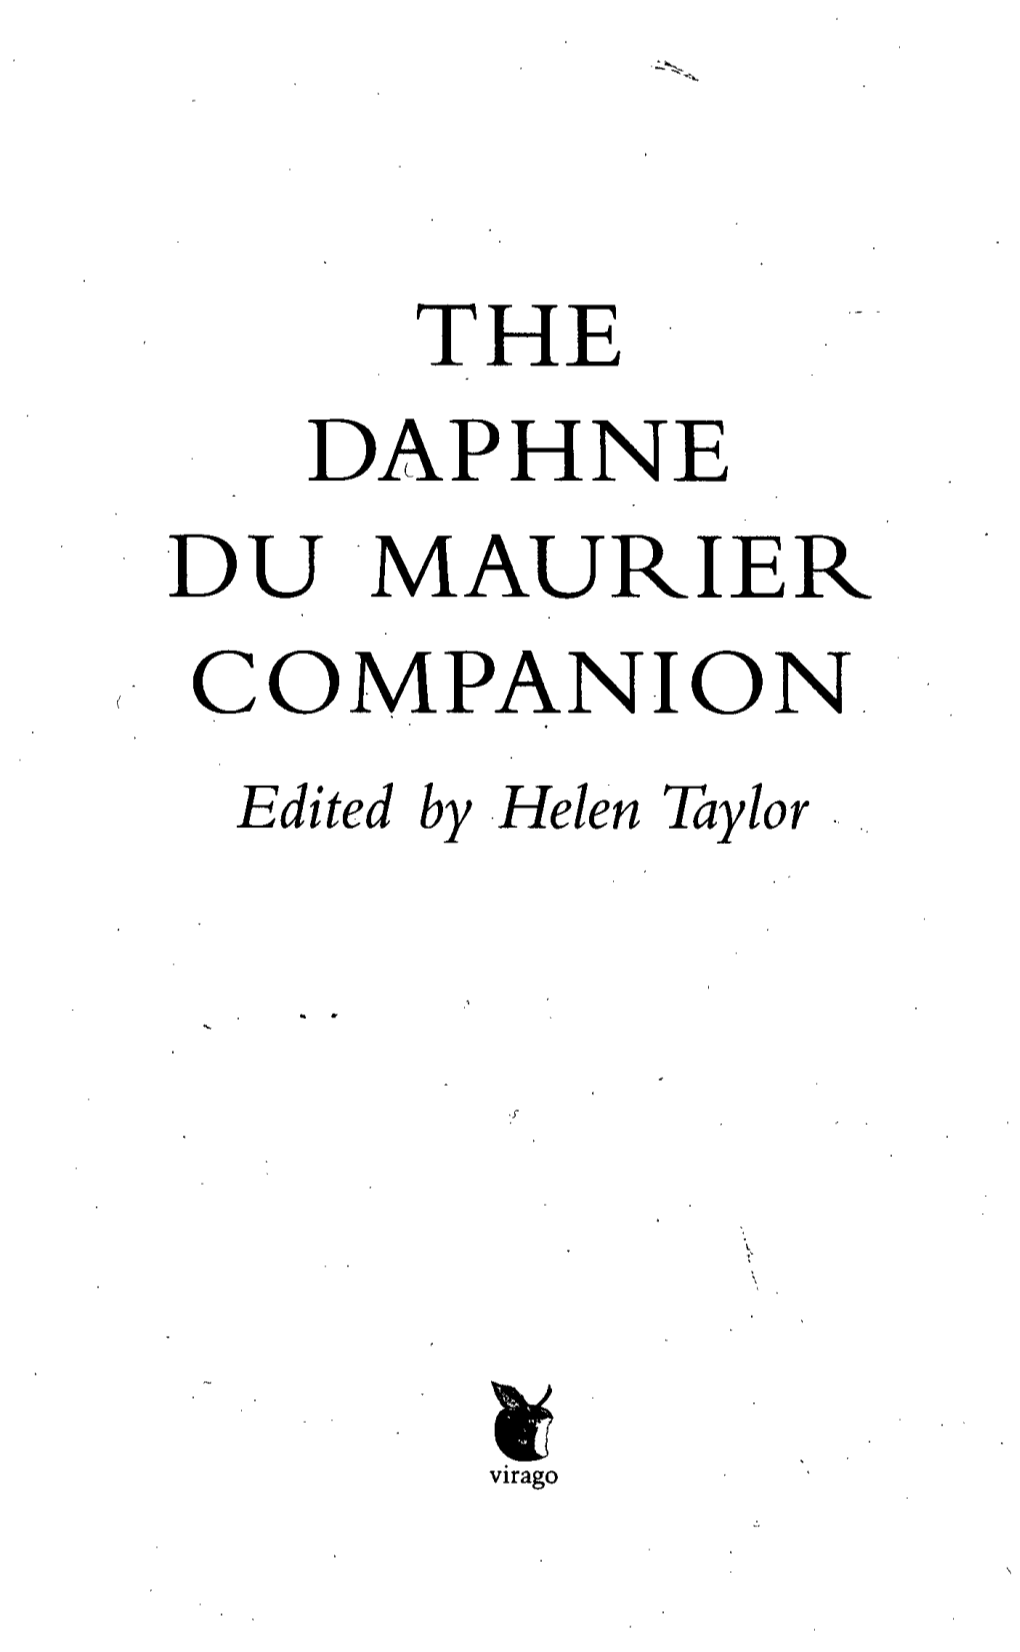 THE DAPHNE DU MAURIER COMPANION Edited by Helen Taylor